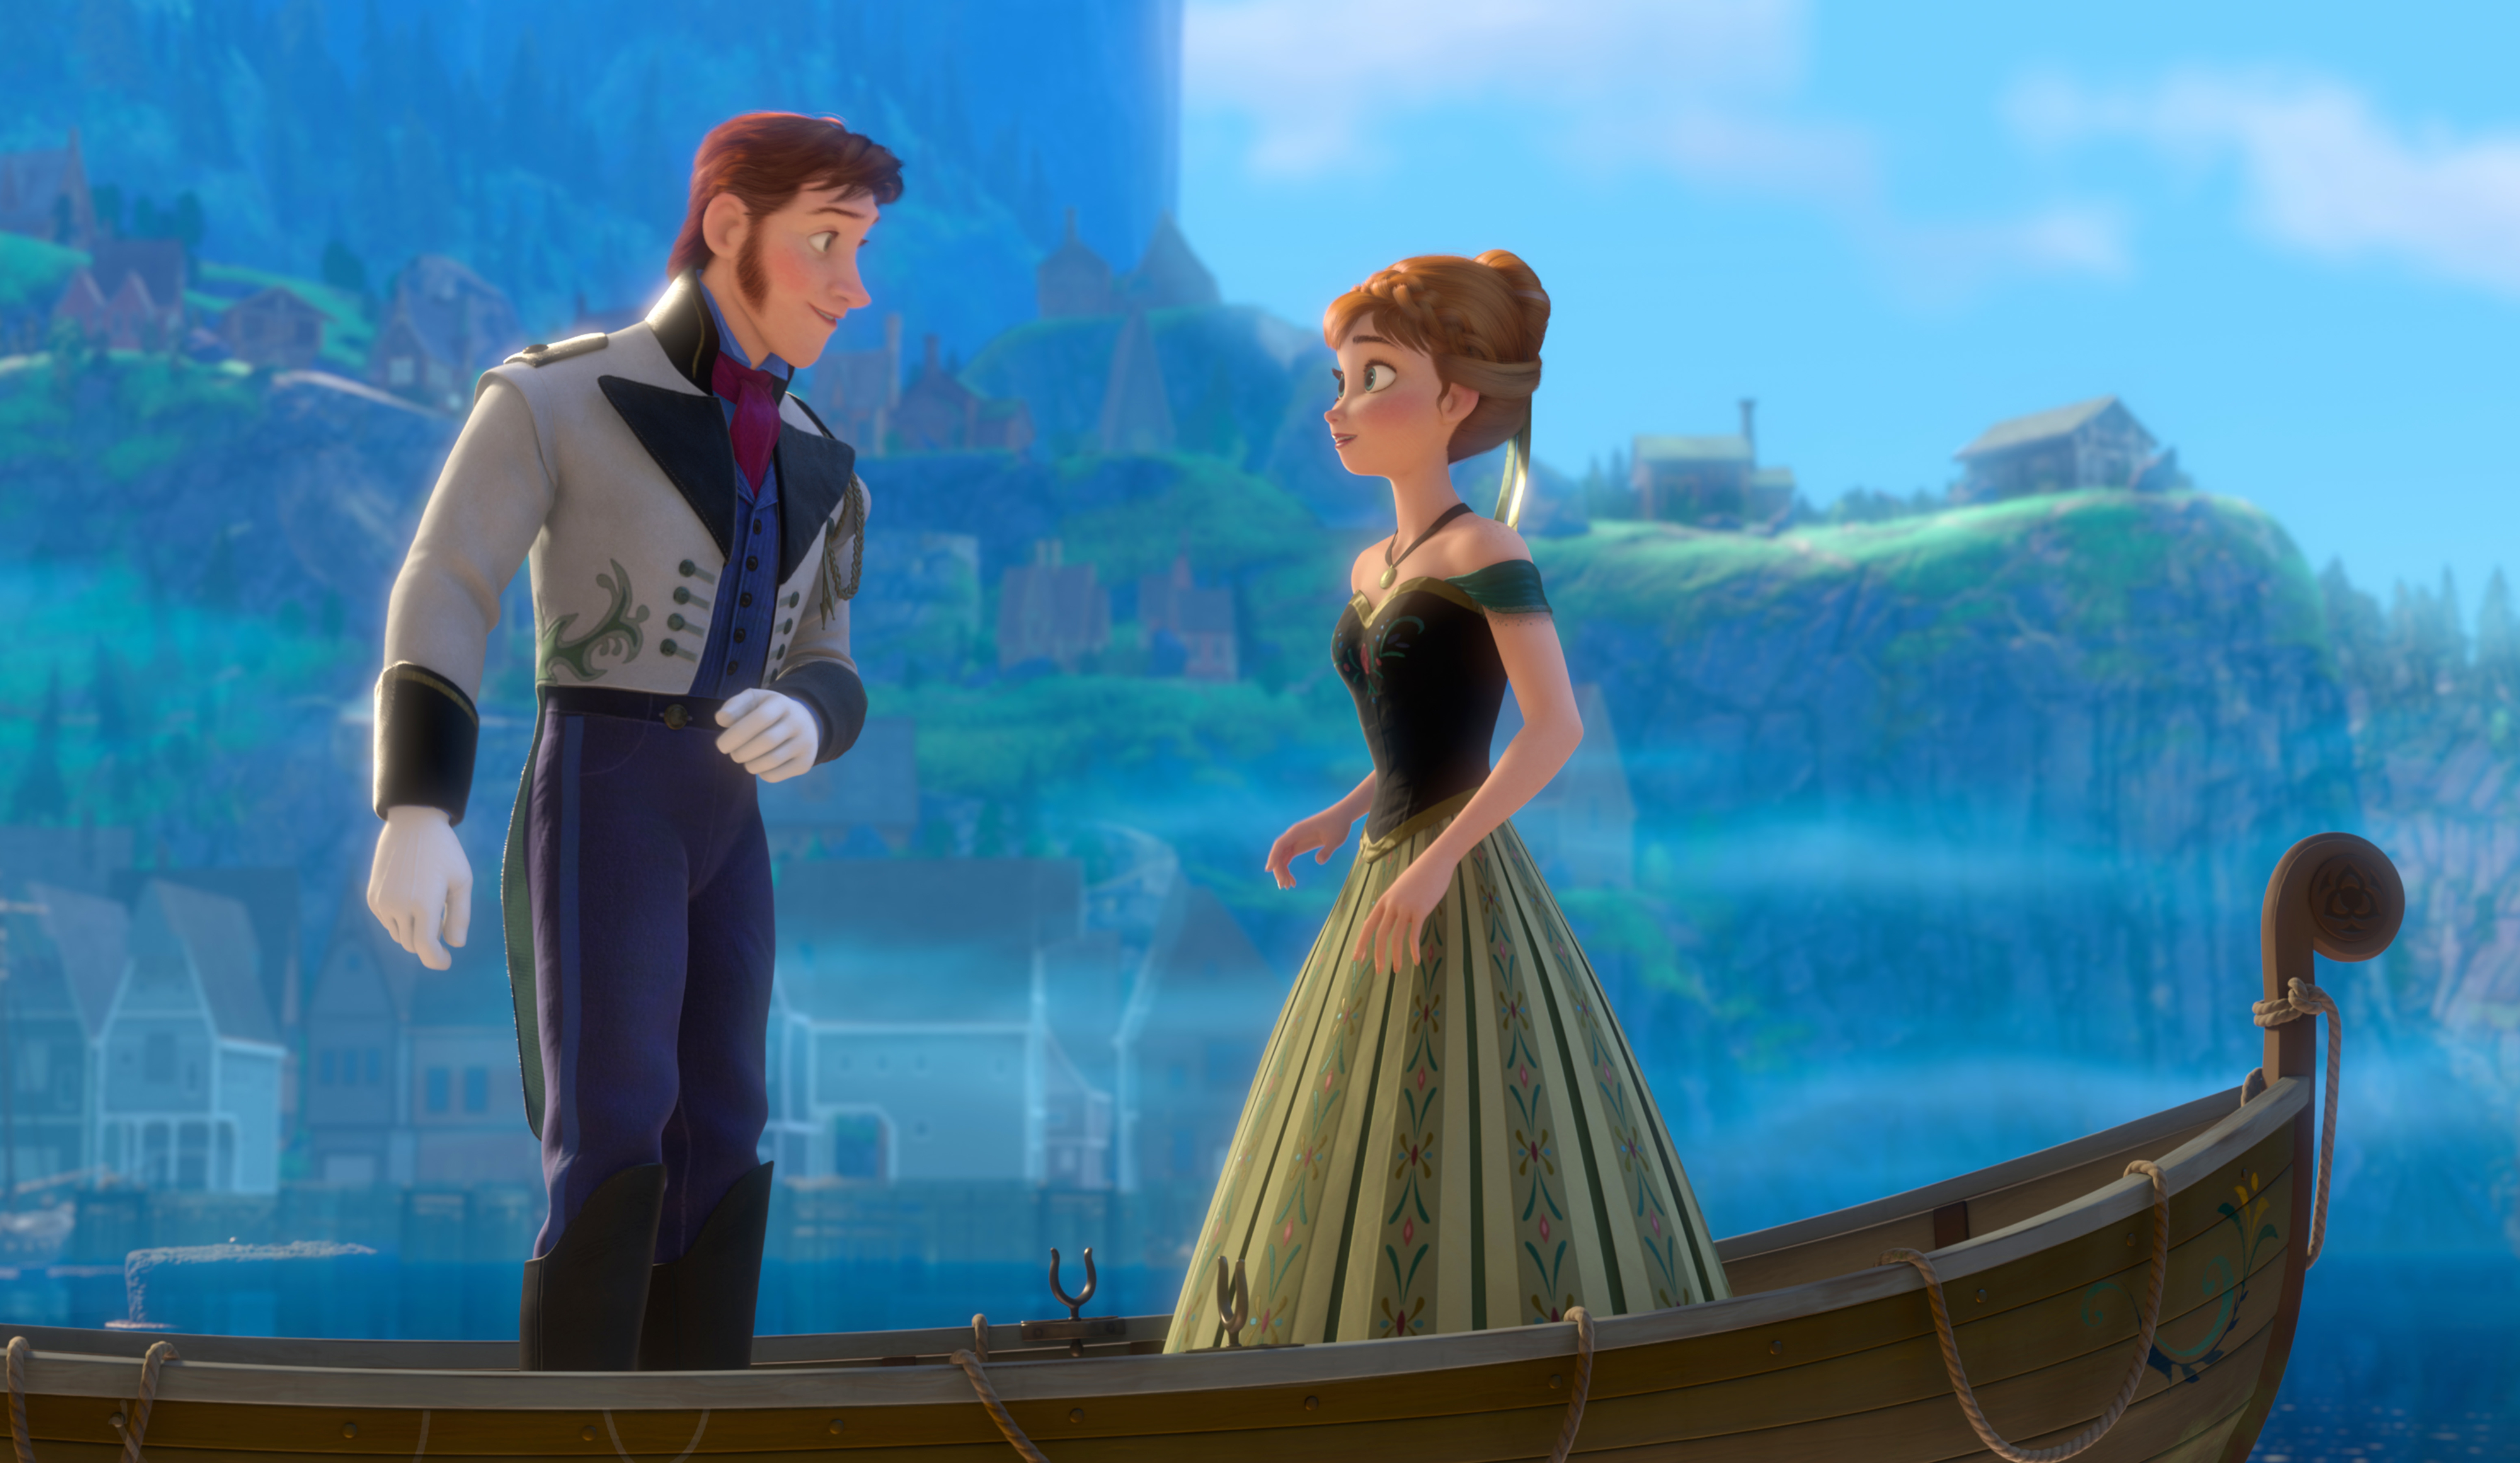 Hans and Anna from Frozen stand on a boat, talking. Hans is in a formal jacket with epaulettes, and Anna is in a dress with a fitted bodice and full skirt